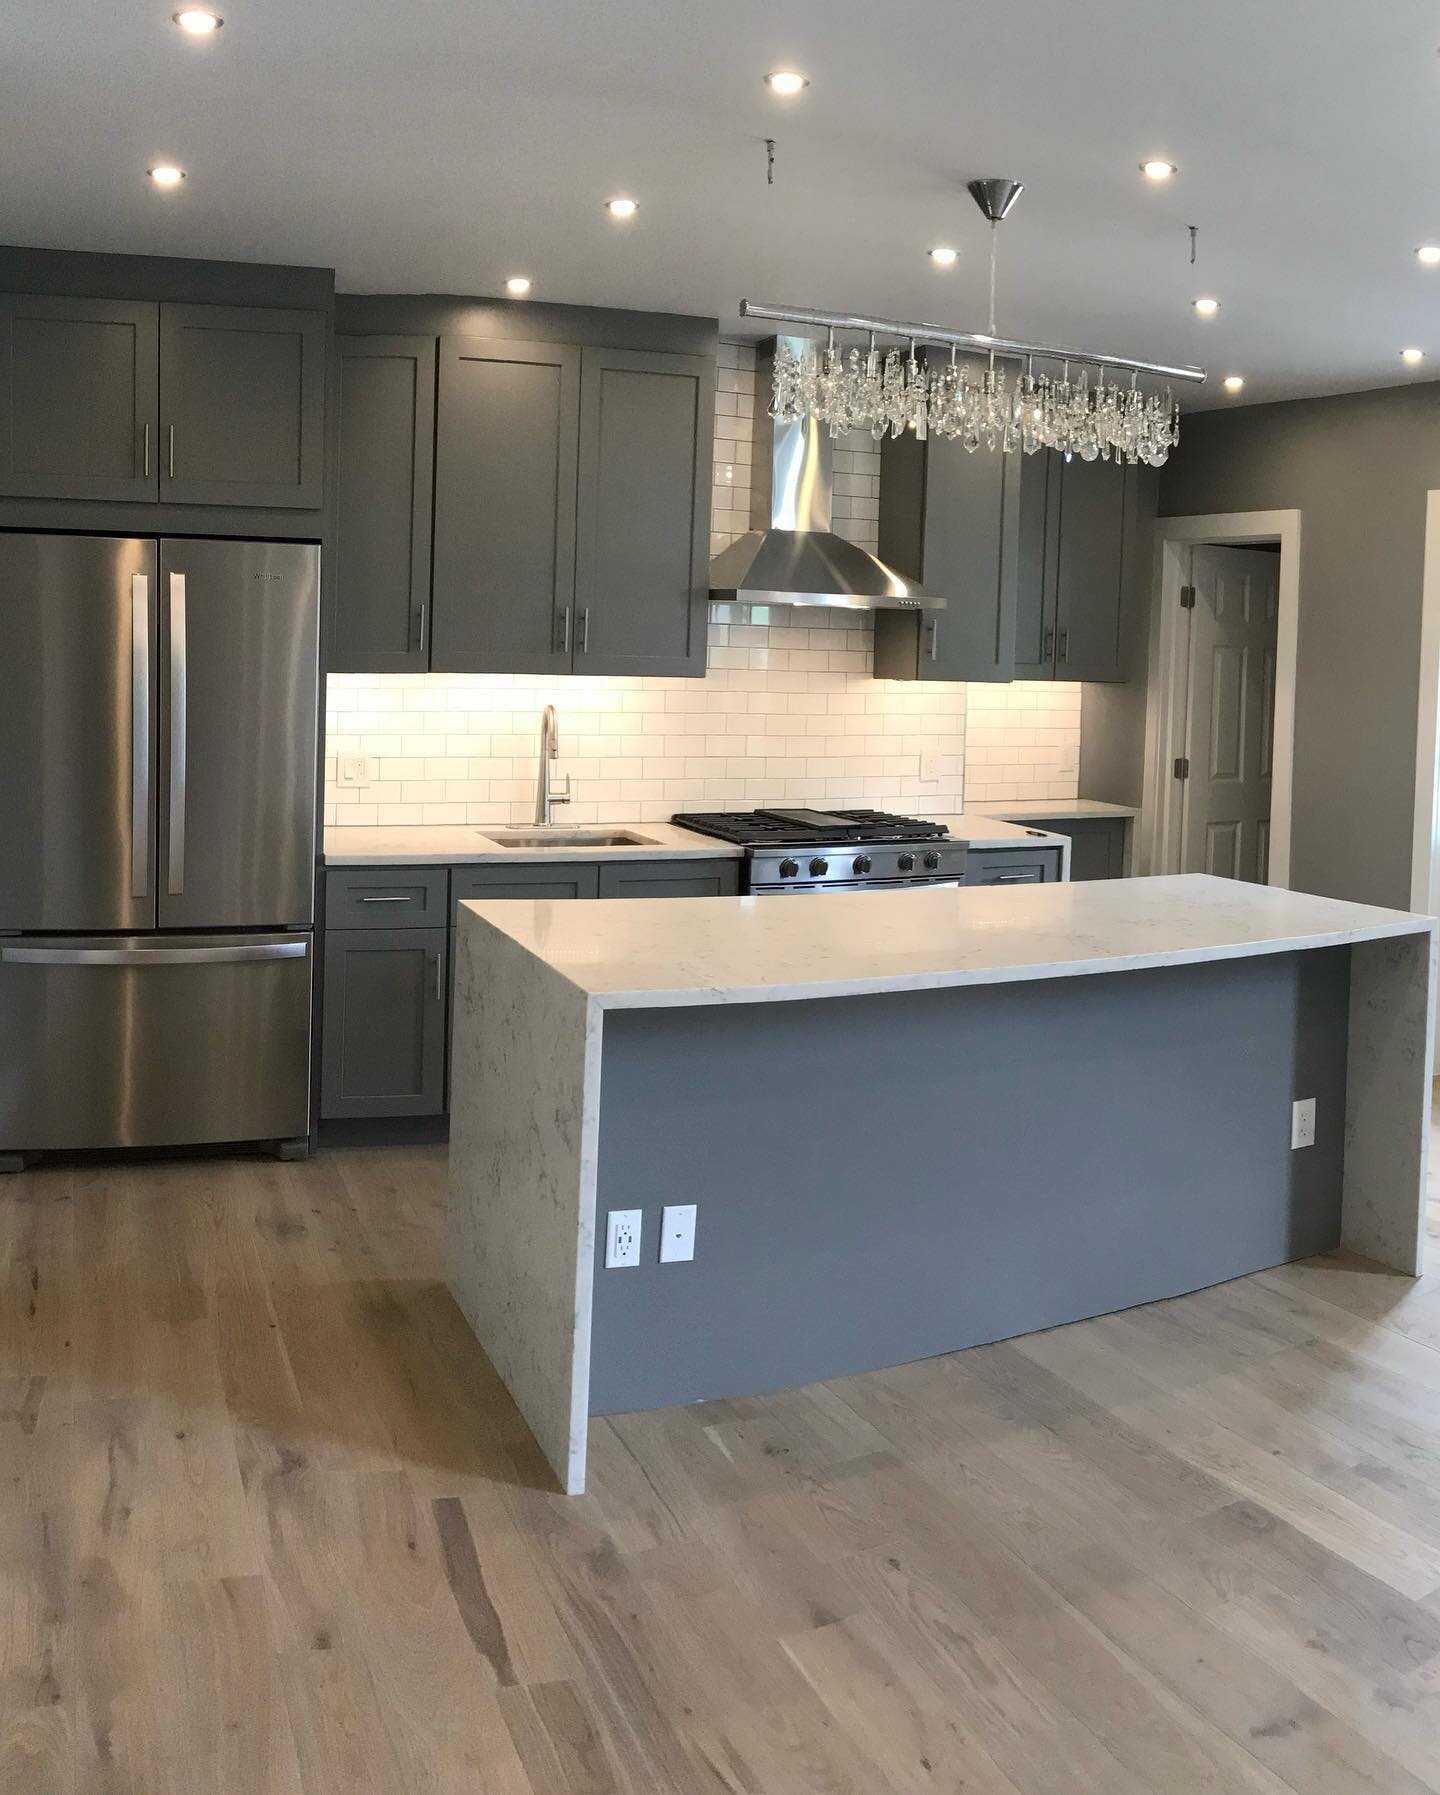 ACR Pro Contractors designed, built and relocated this Williamsburg, Brooklyn Kitchen featuring Dark Gray Shaker Cabinetry, a Quartz Countertop with Waterfall sides, LED lighting, Under Cabinet Lighting, a Subway Tiled Backsplash, an affordable Pantr